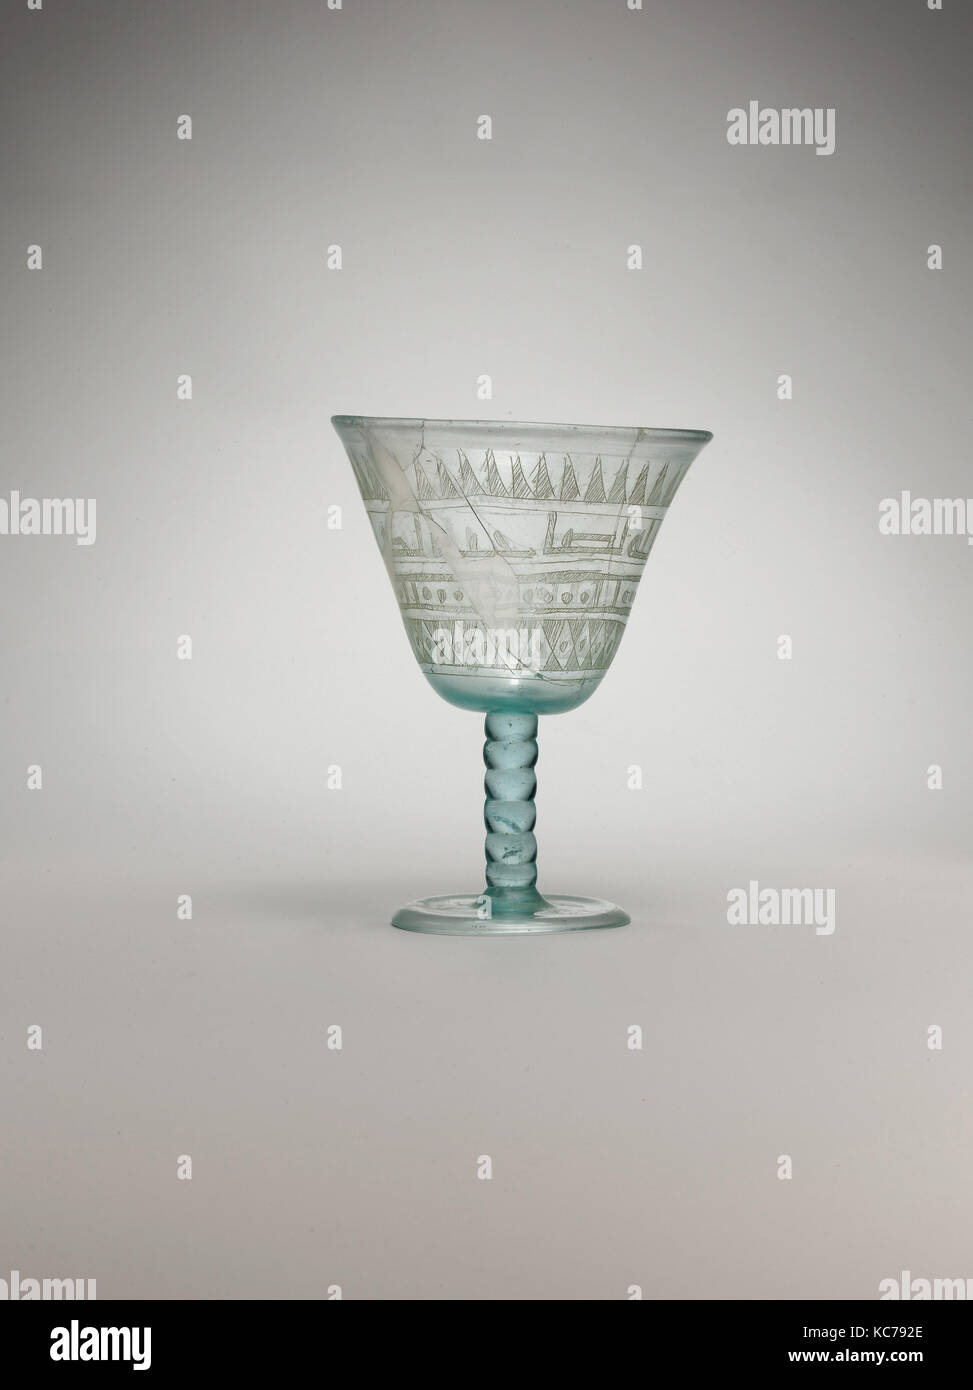 Cloud Cup Smooth Surface, Irregular Shaped Drinking Glass, Wavy